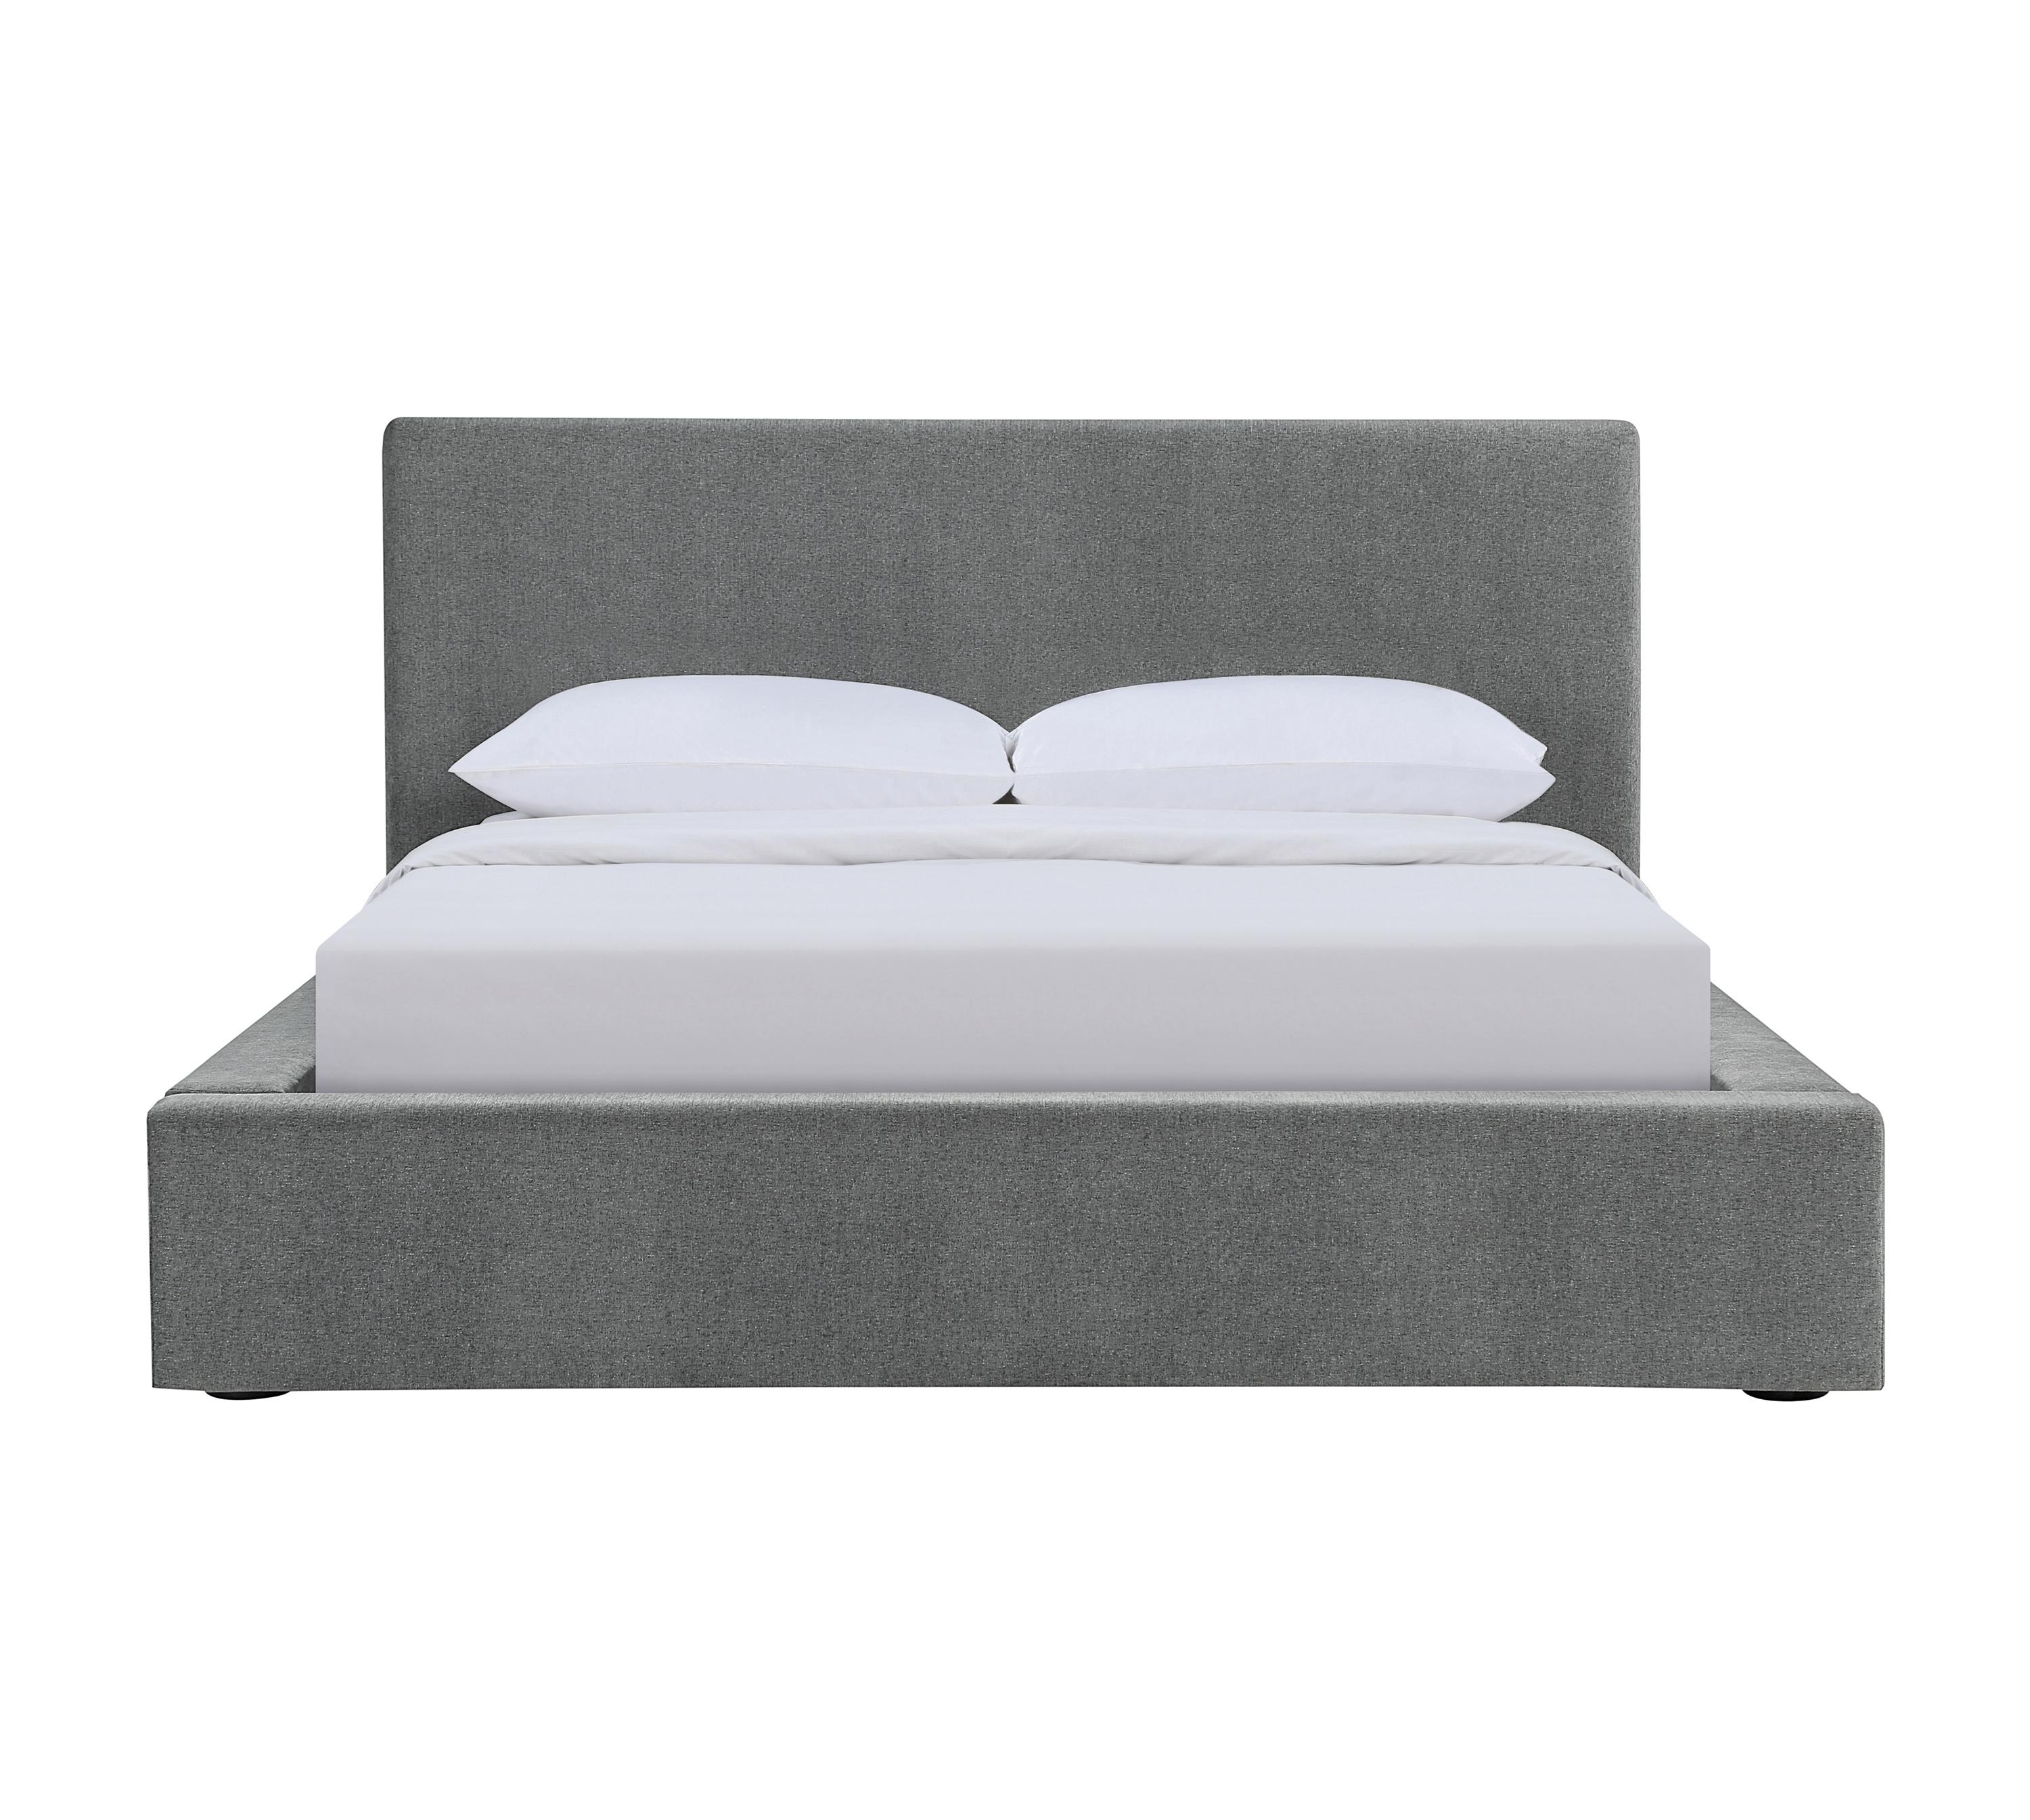 Modern Bed 316020KW Gregory 316020KW in Graphite 